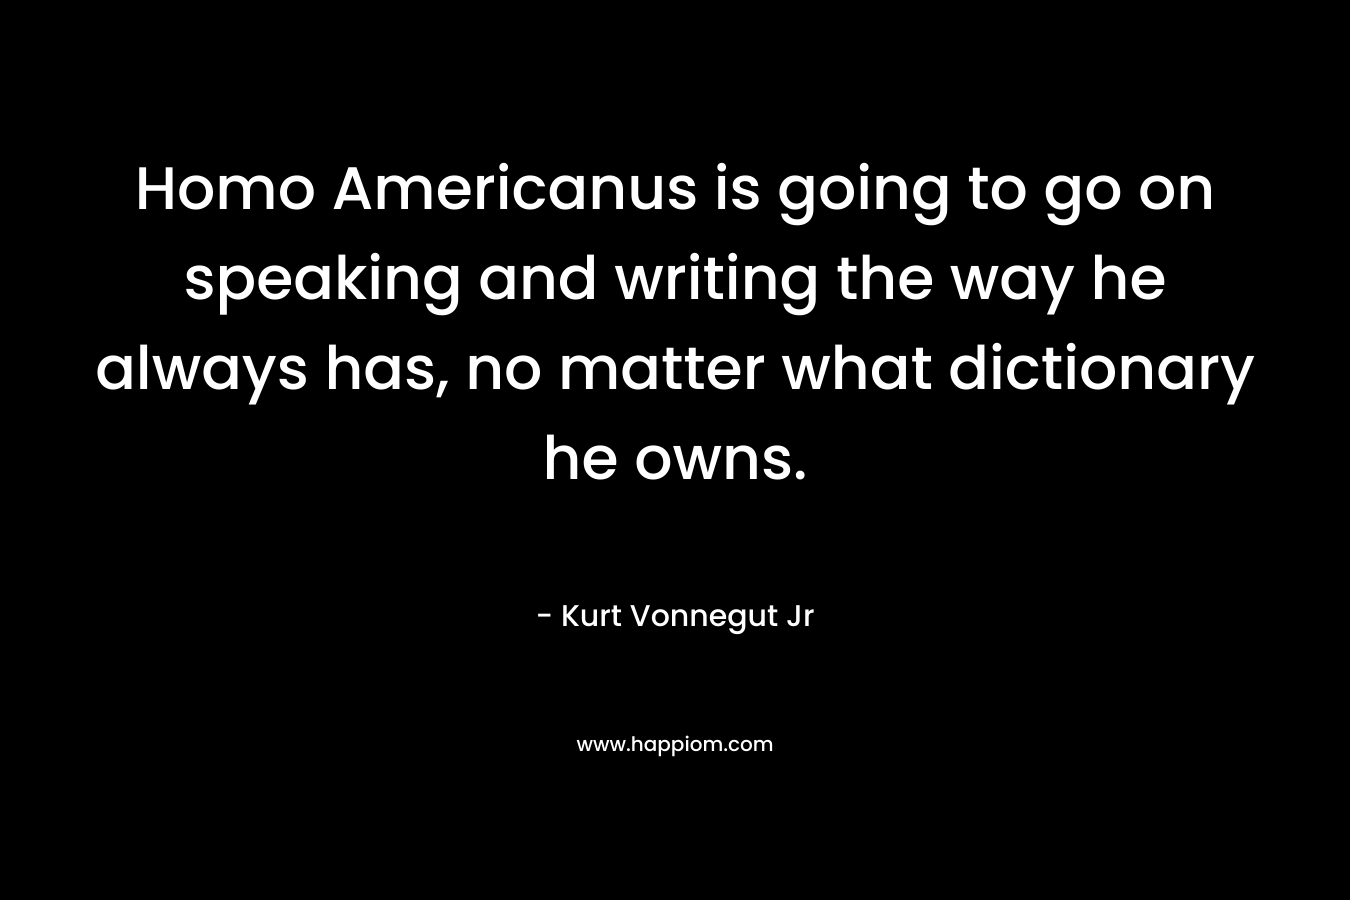 Homo Americanus is going to go on speaking and writing the way he always has, no matter what dictionary he owns.